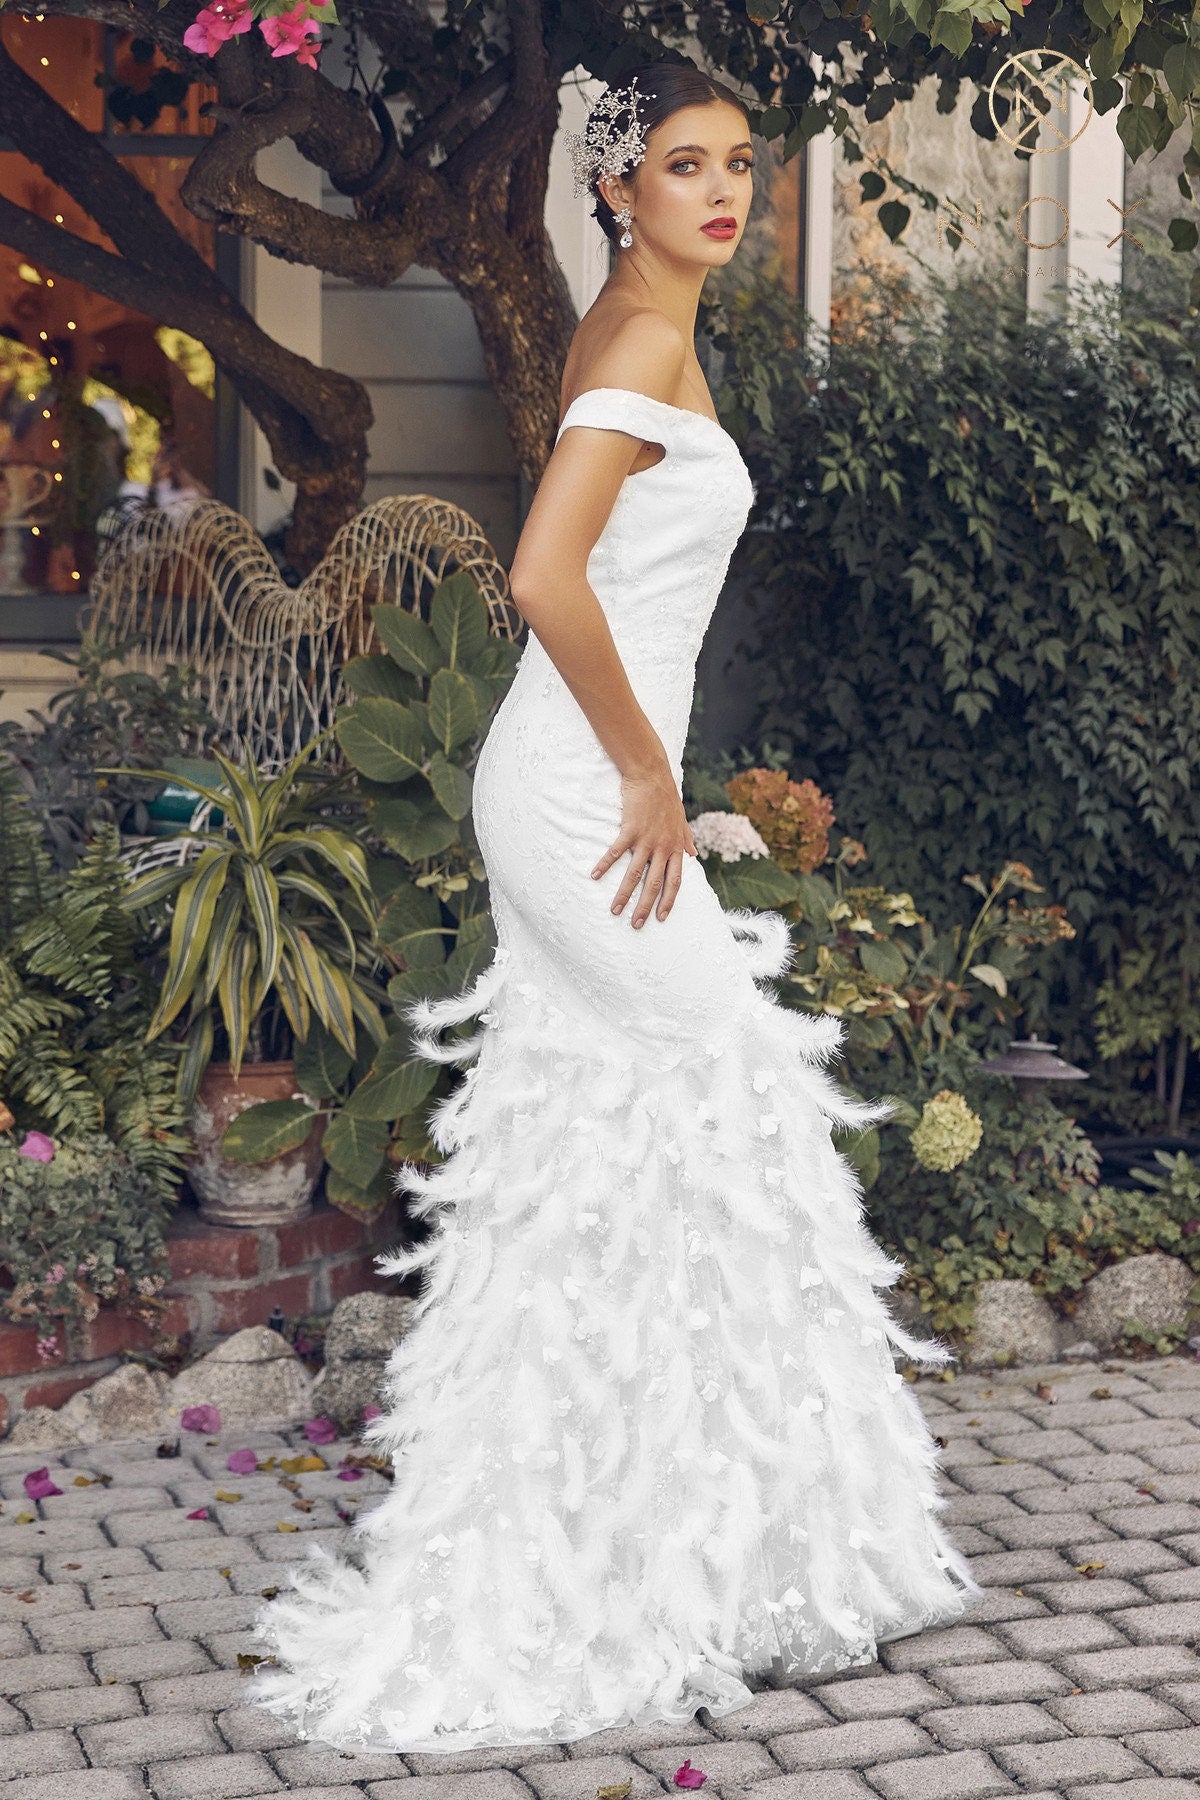 Beaded Off-Shoulder Sheath Bridal Gown with Feather Accents V Neckline Open Back Short Train Wedding Dress White Lace